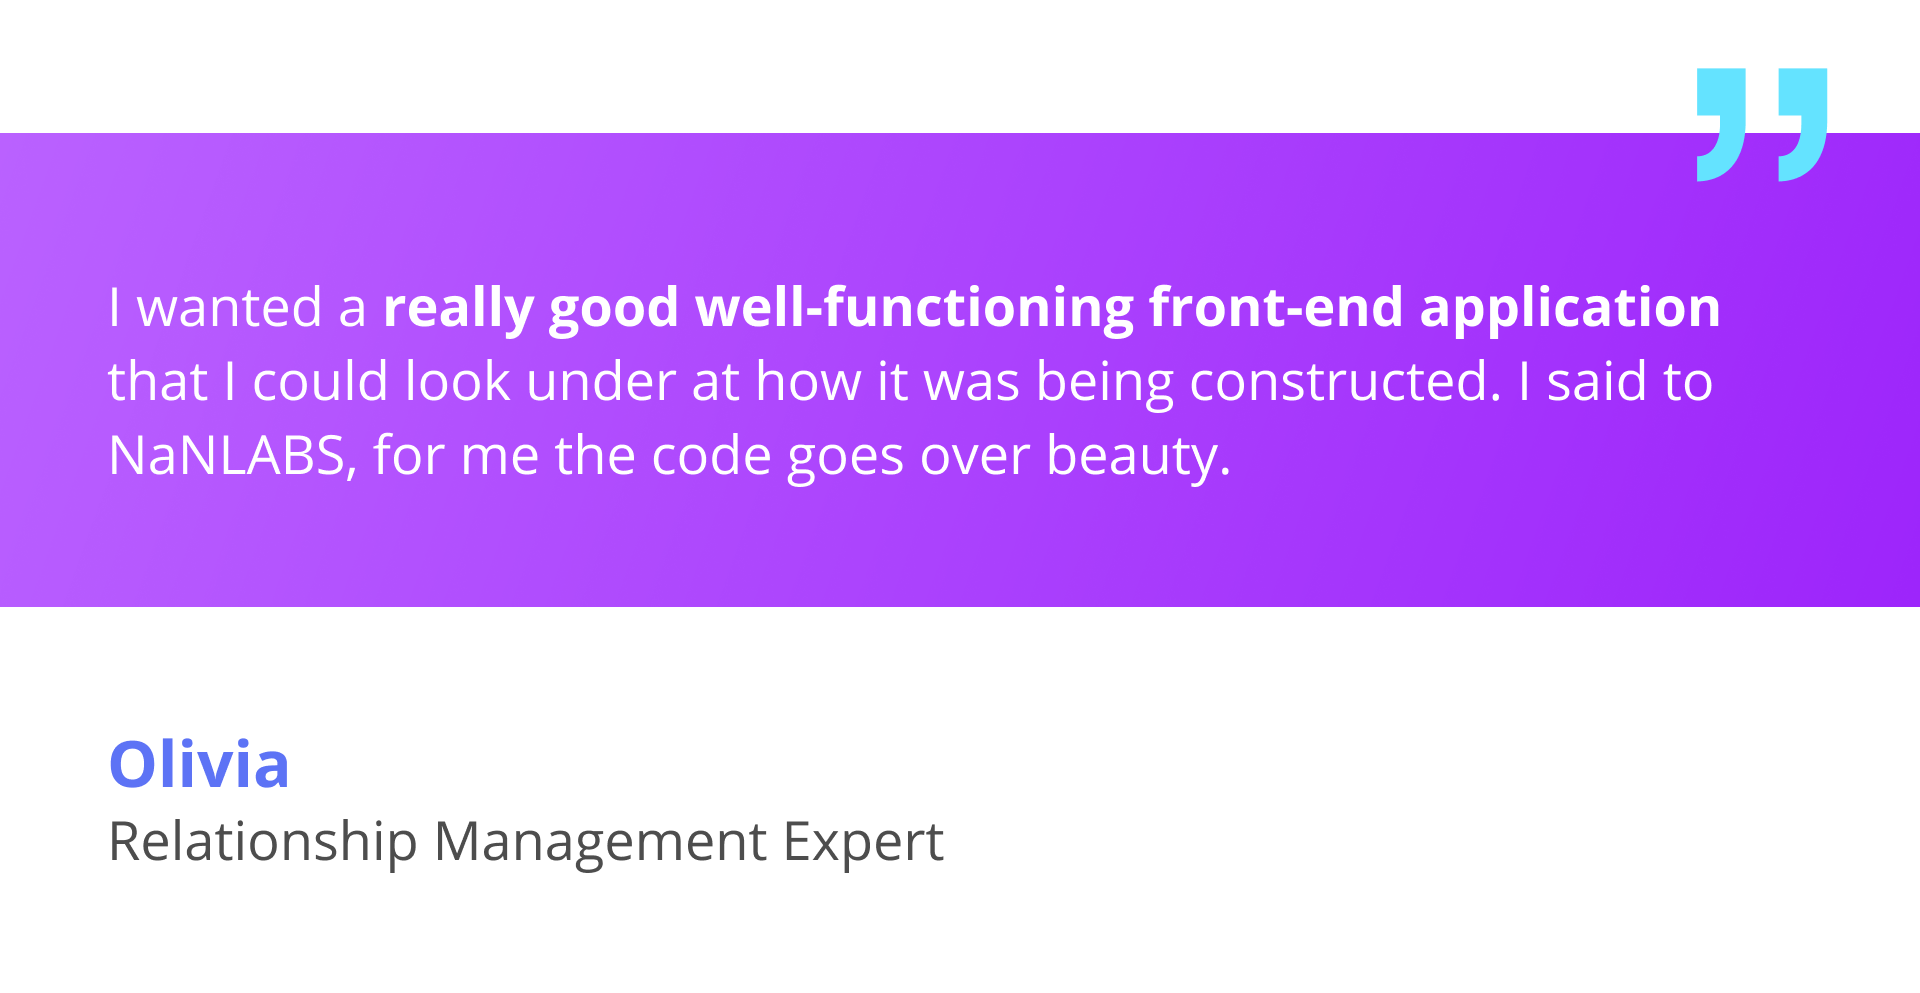 Quote by NaNLABS’s client on product development expectations